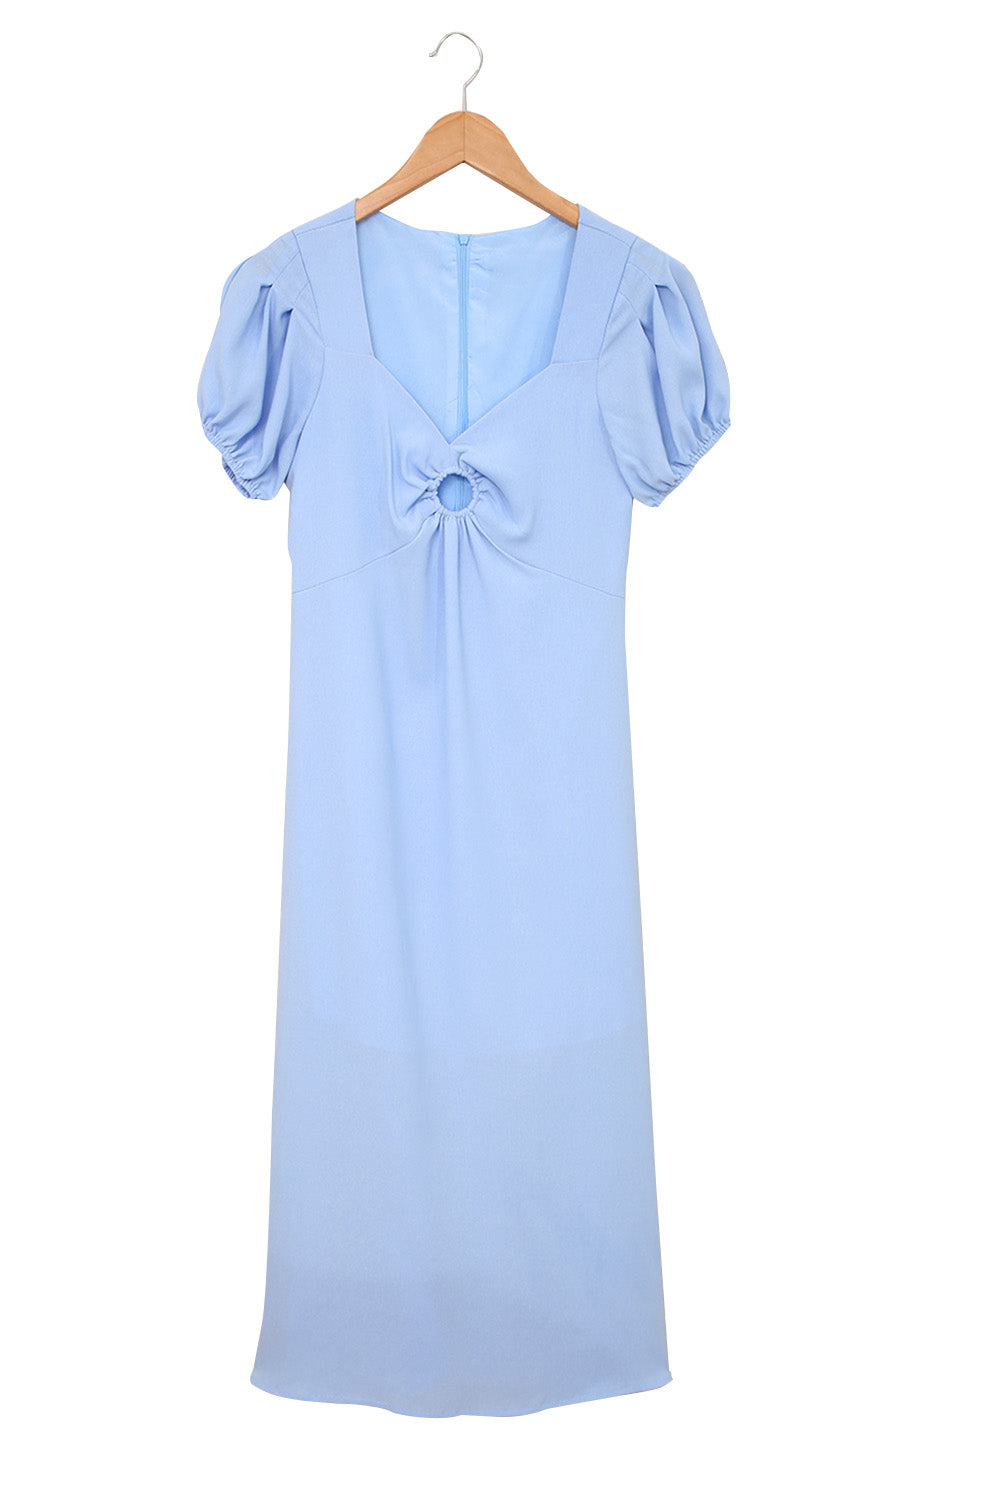 Sky Blue Puff Sleeve Midi Dress Ring Front Flowy Dress for Women LC618573-4